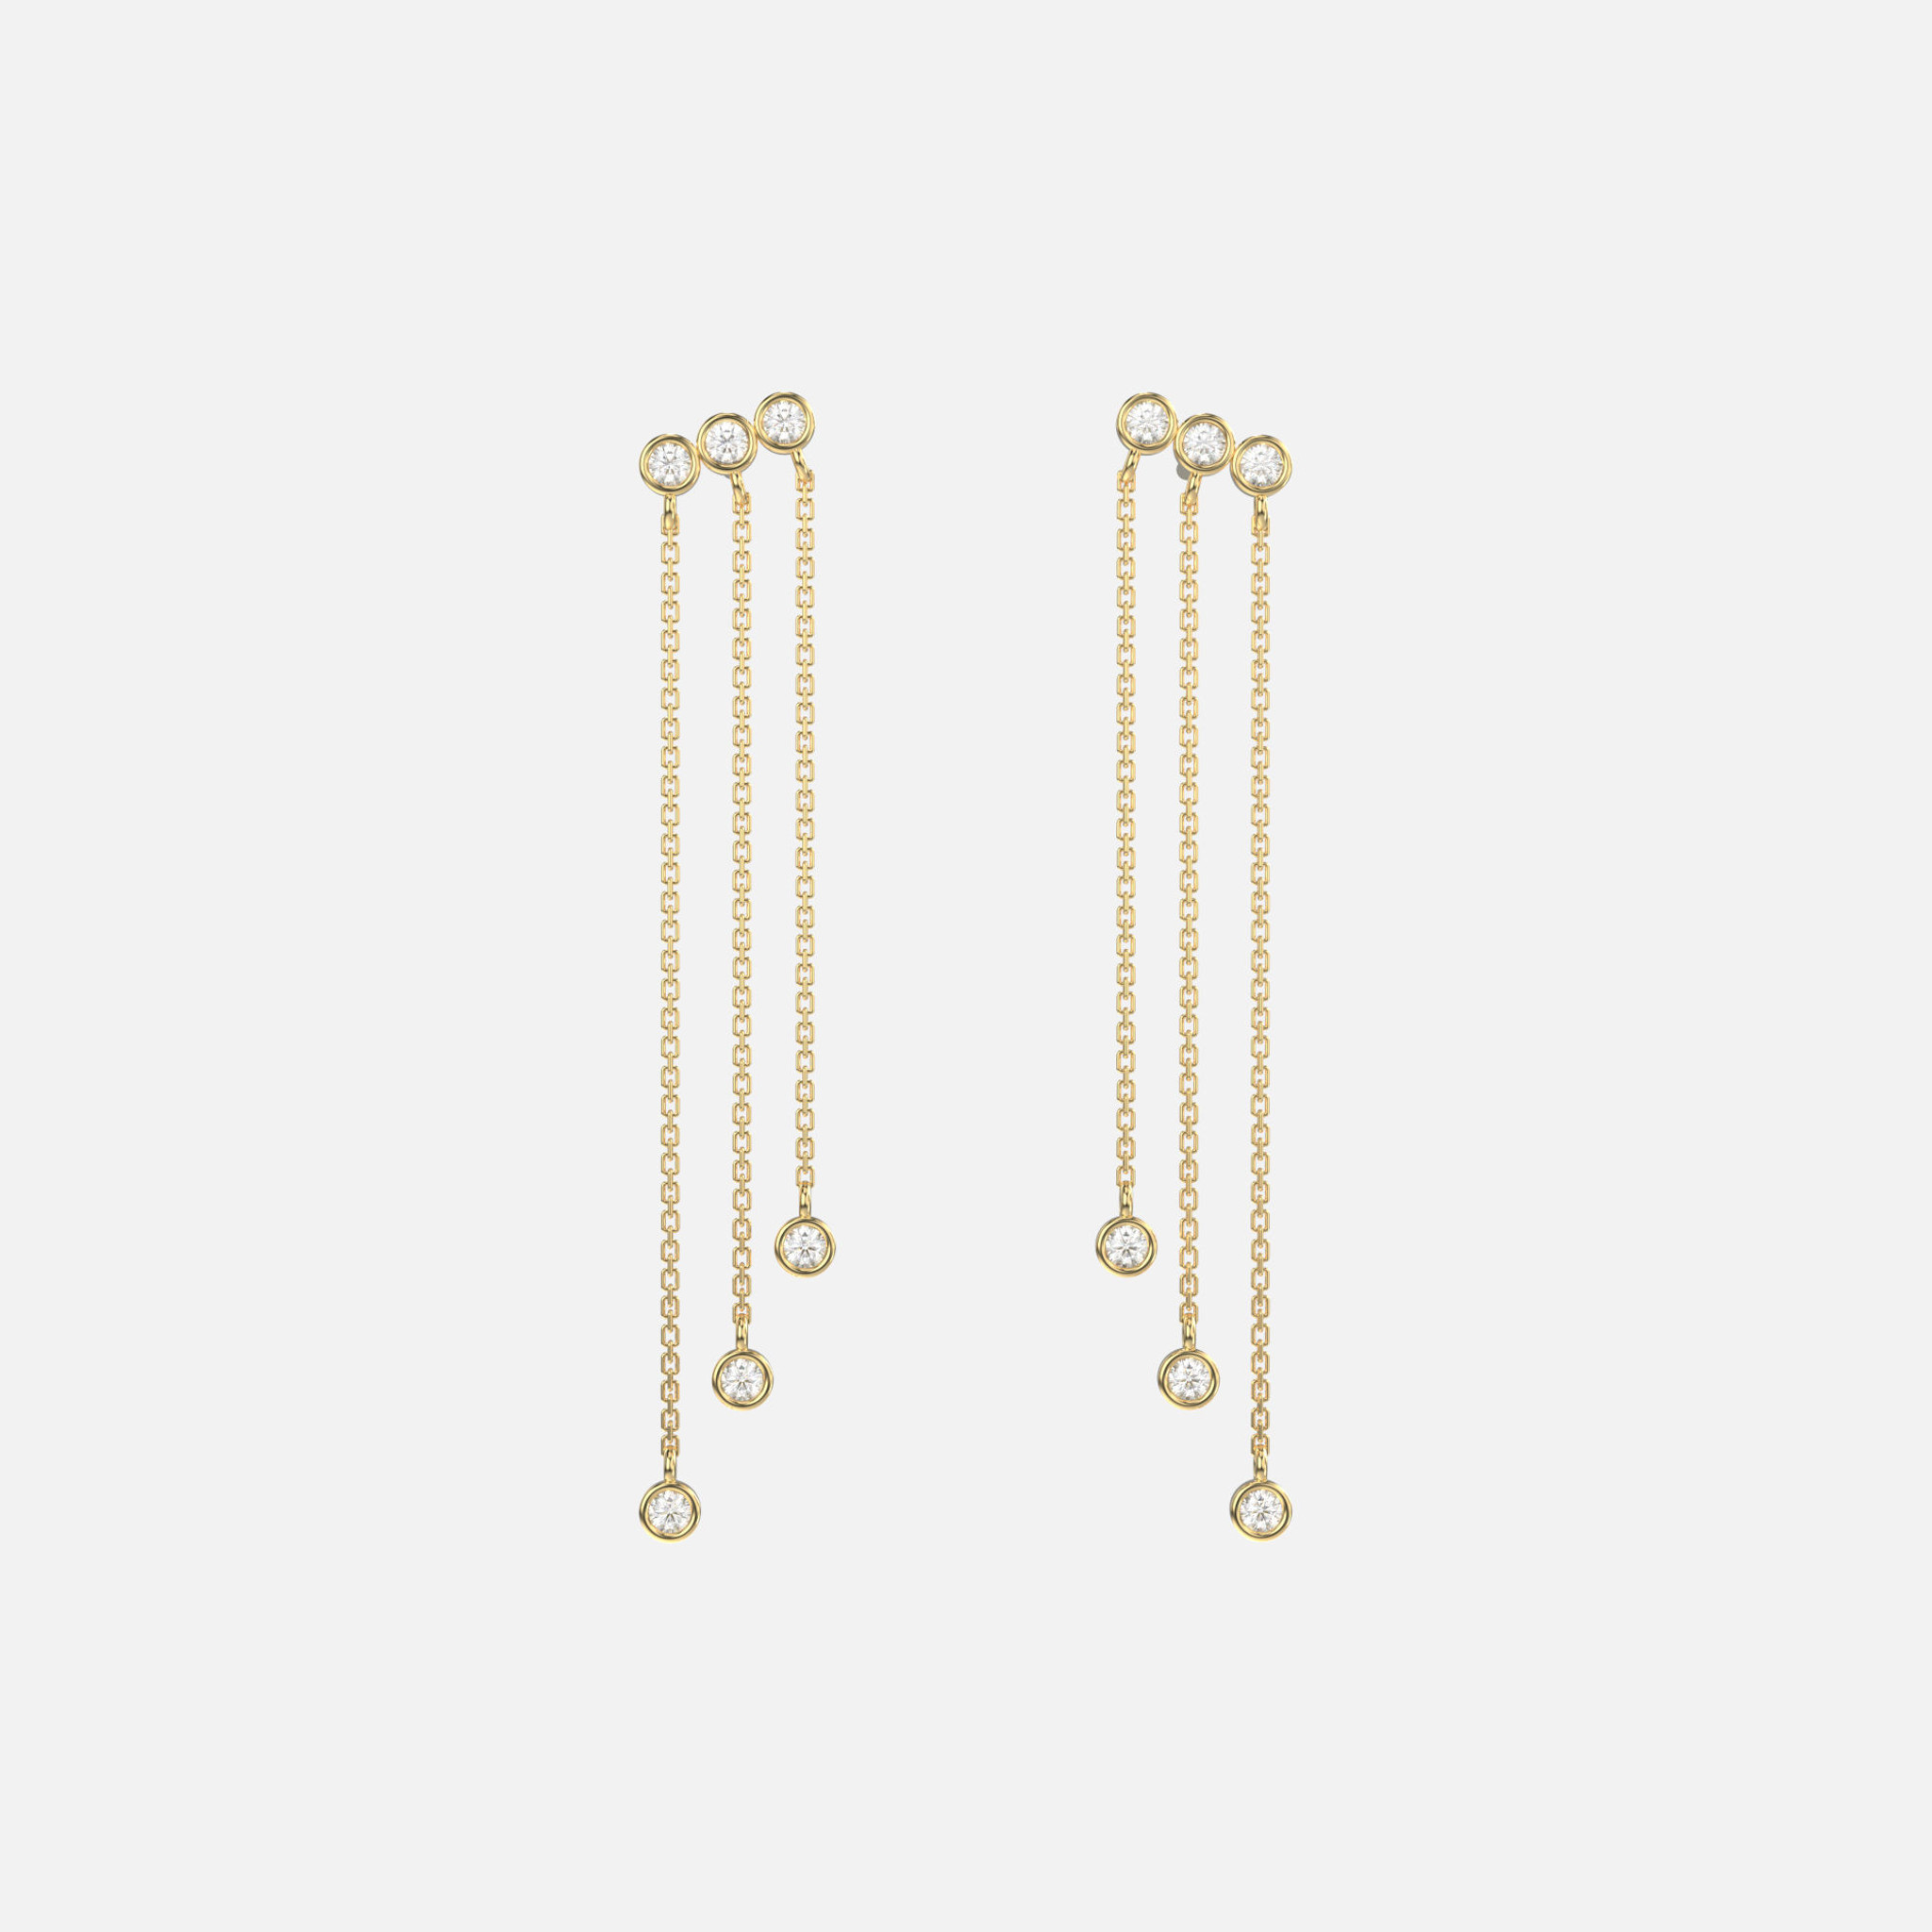 14k gold diamond drop earrings with bezel set diamond trio and cascading cable chain strands.